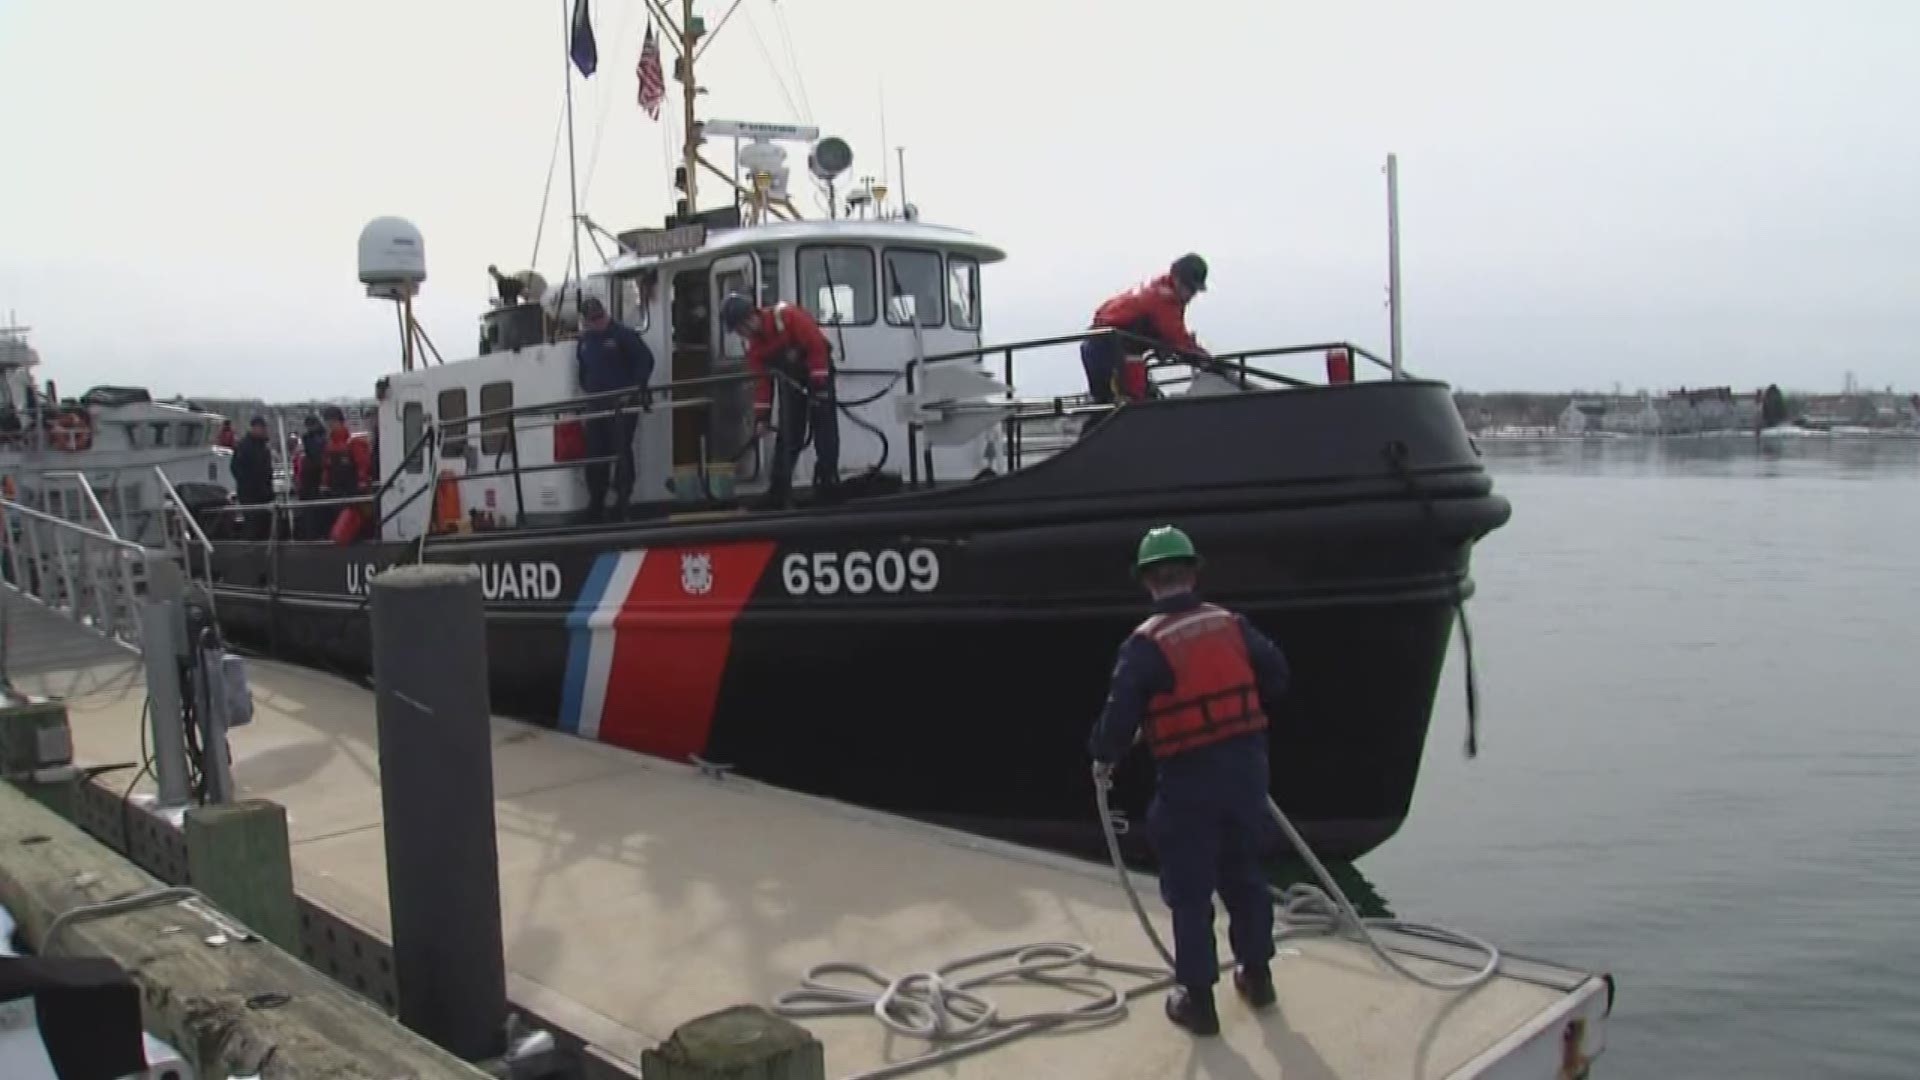 The new Coast Guard operation center opened Wednesday in South Portland.